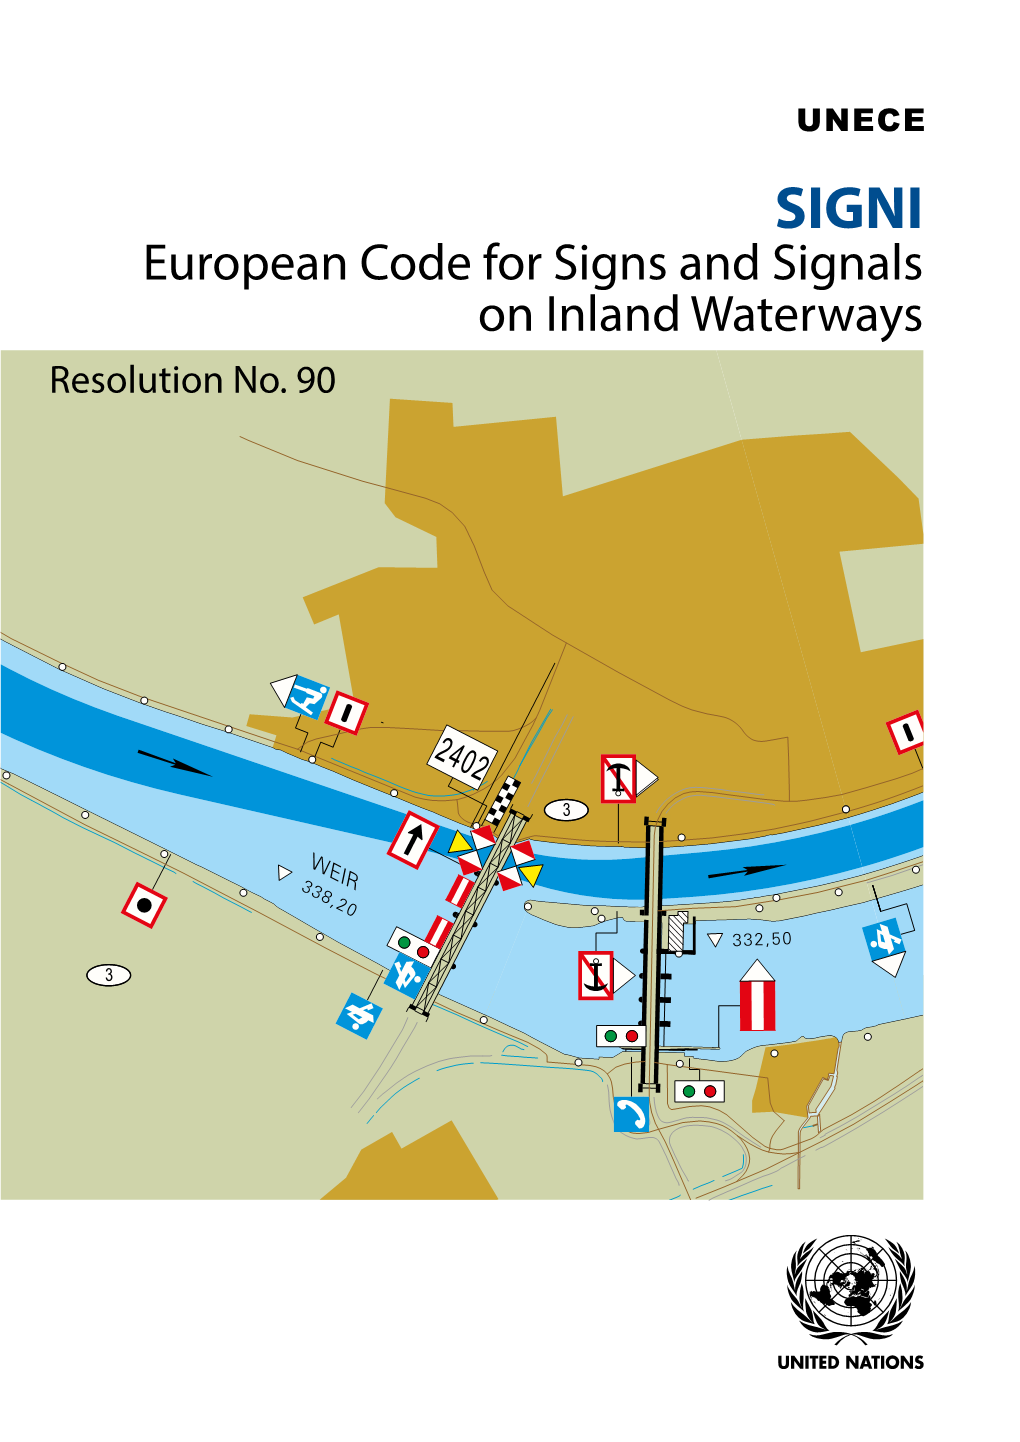 European Code for Signs and Signals on Inland Waterways Resolution No